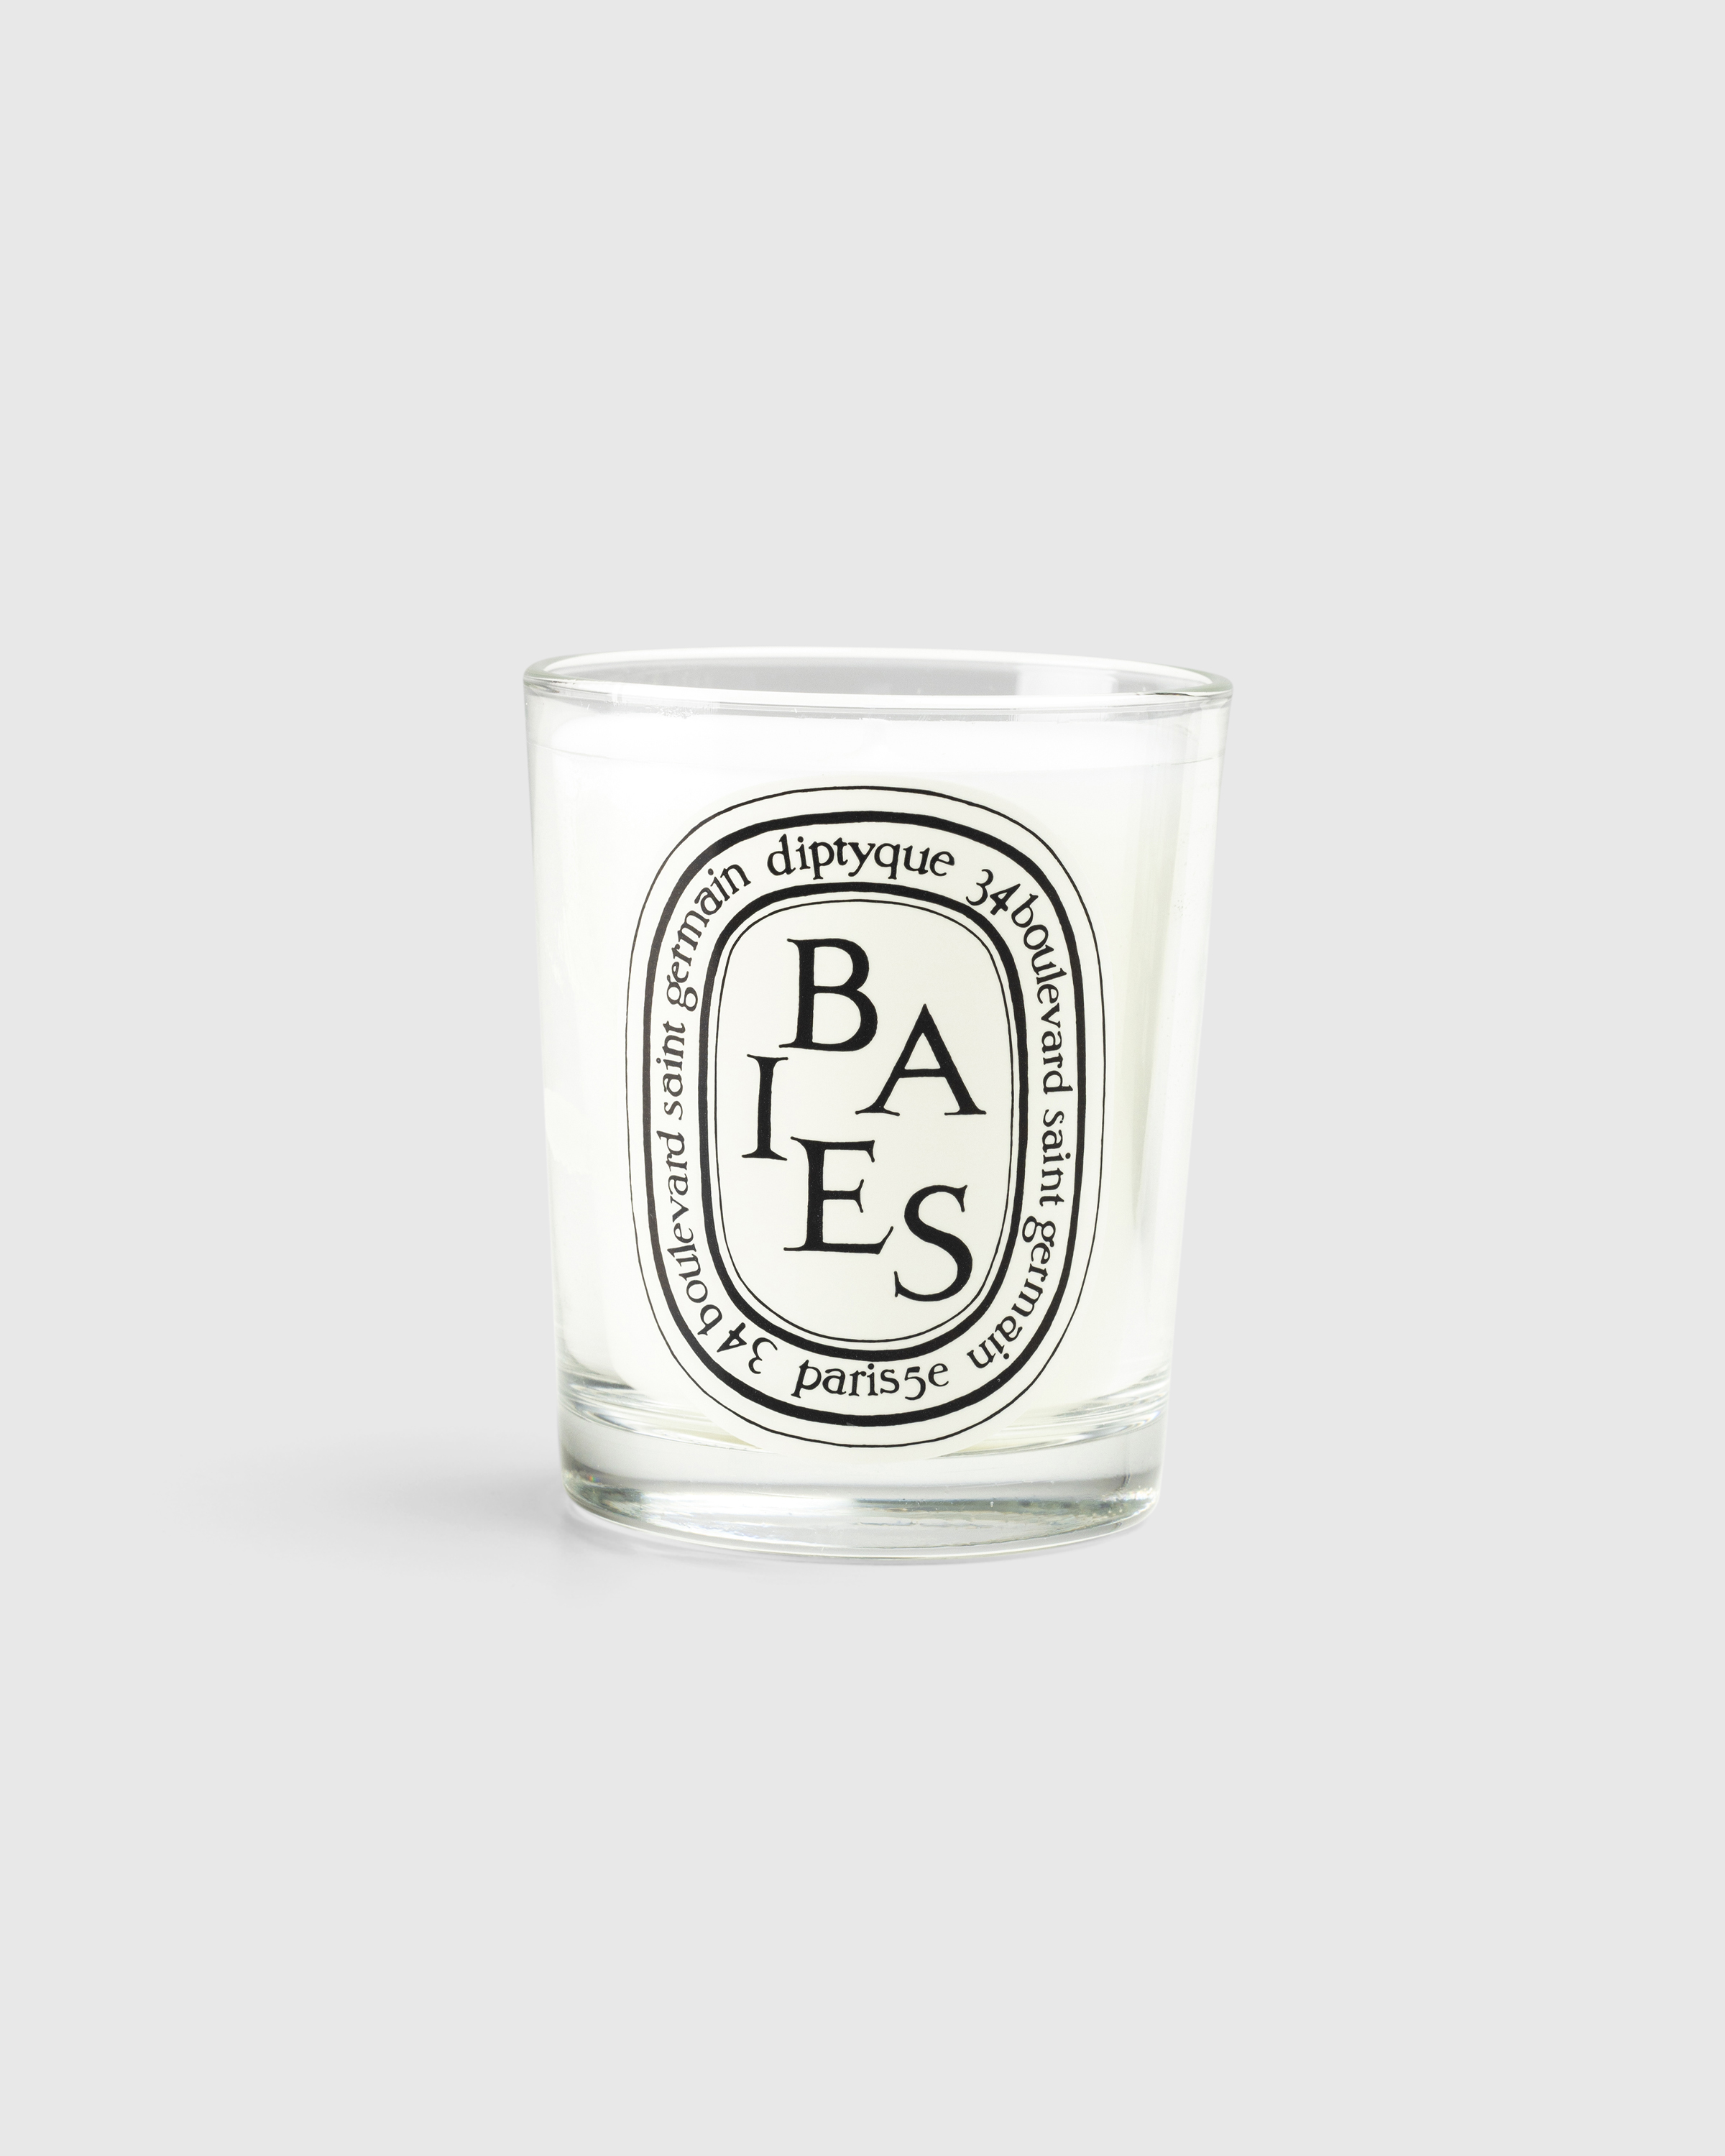 Diptyque – Standard Candle Baies 190g - Candles & Fragrances - White - Image 1